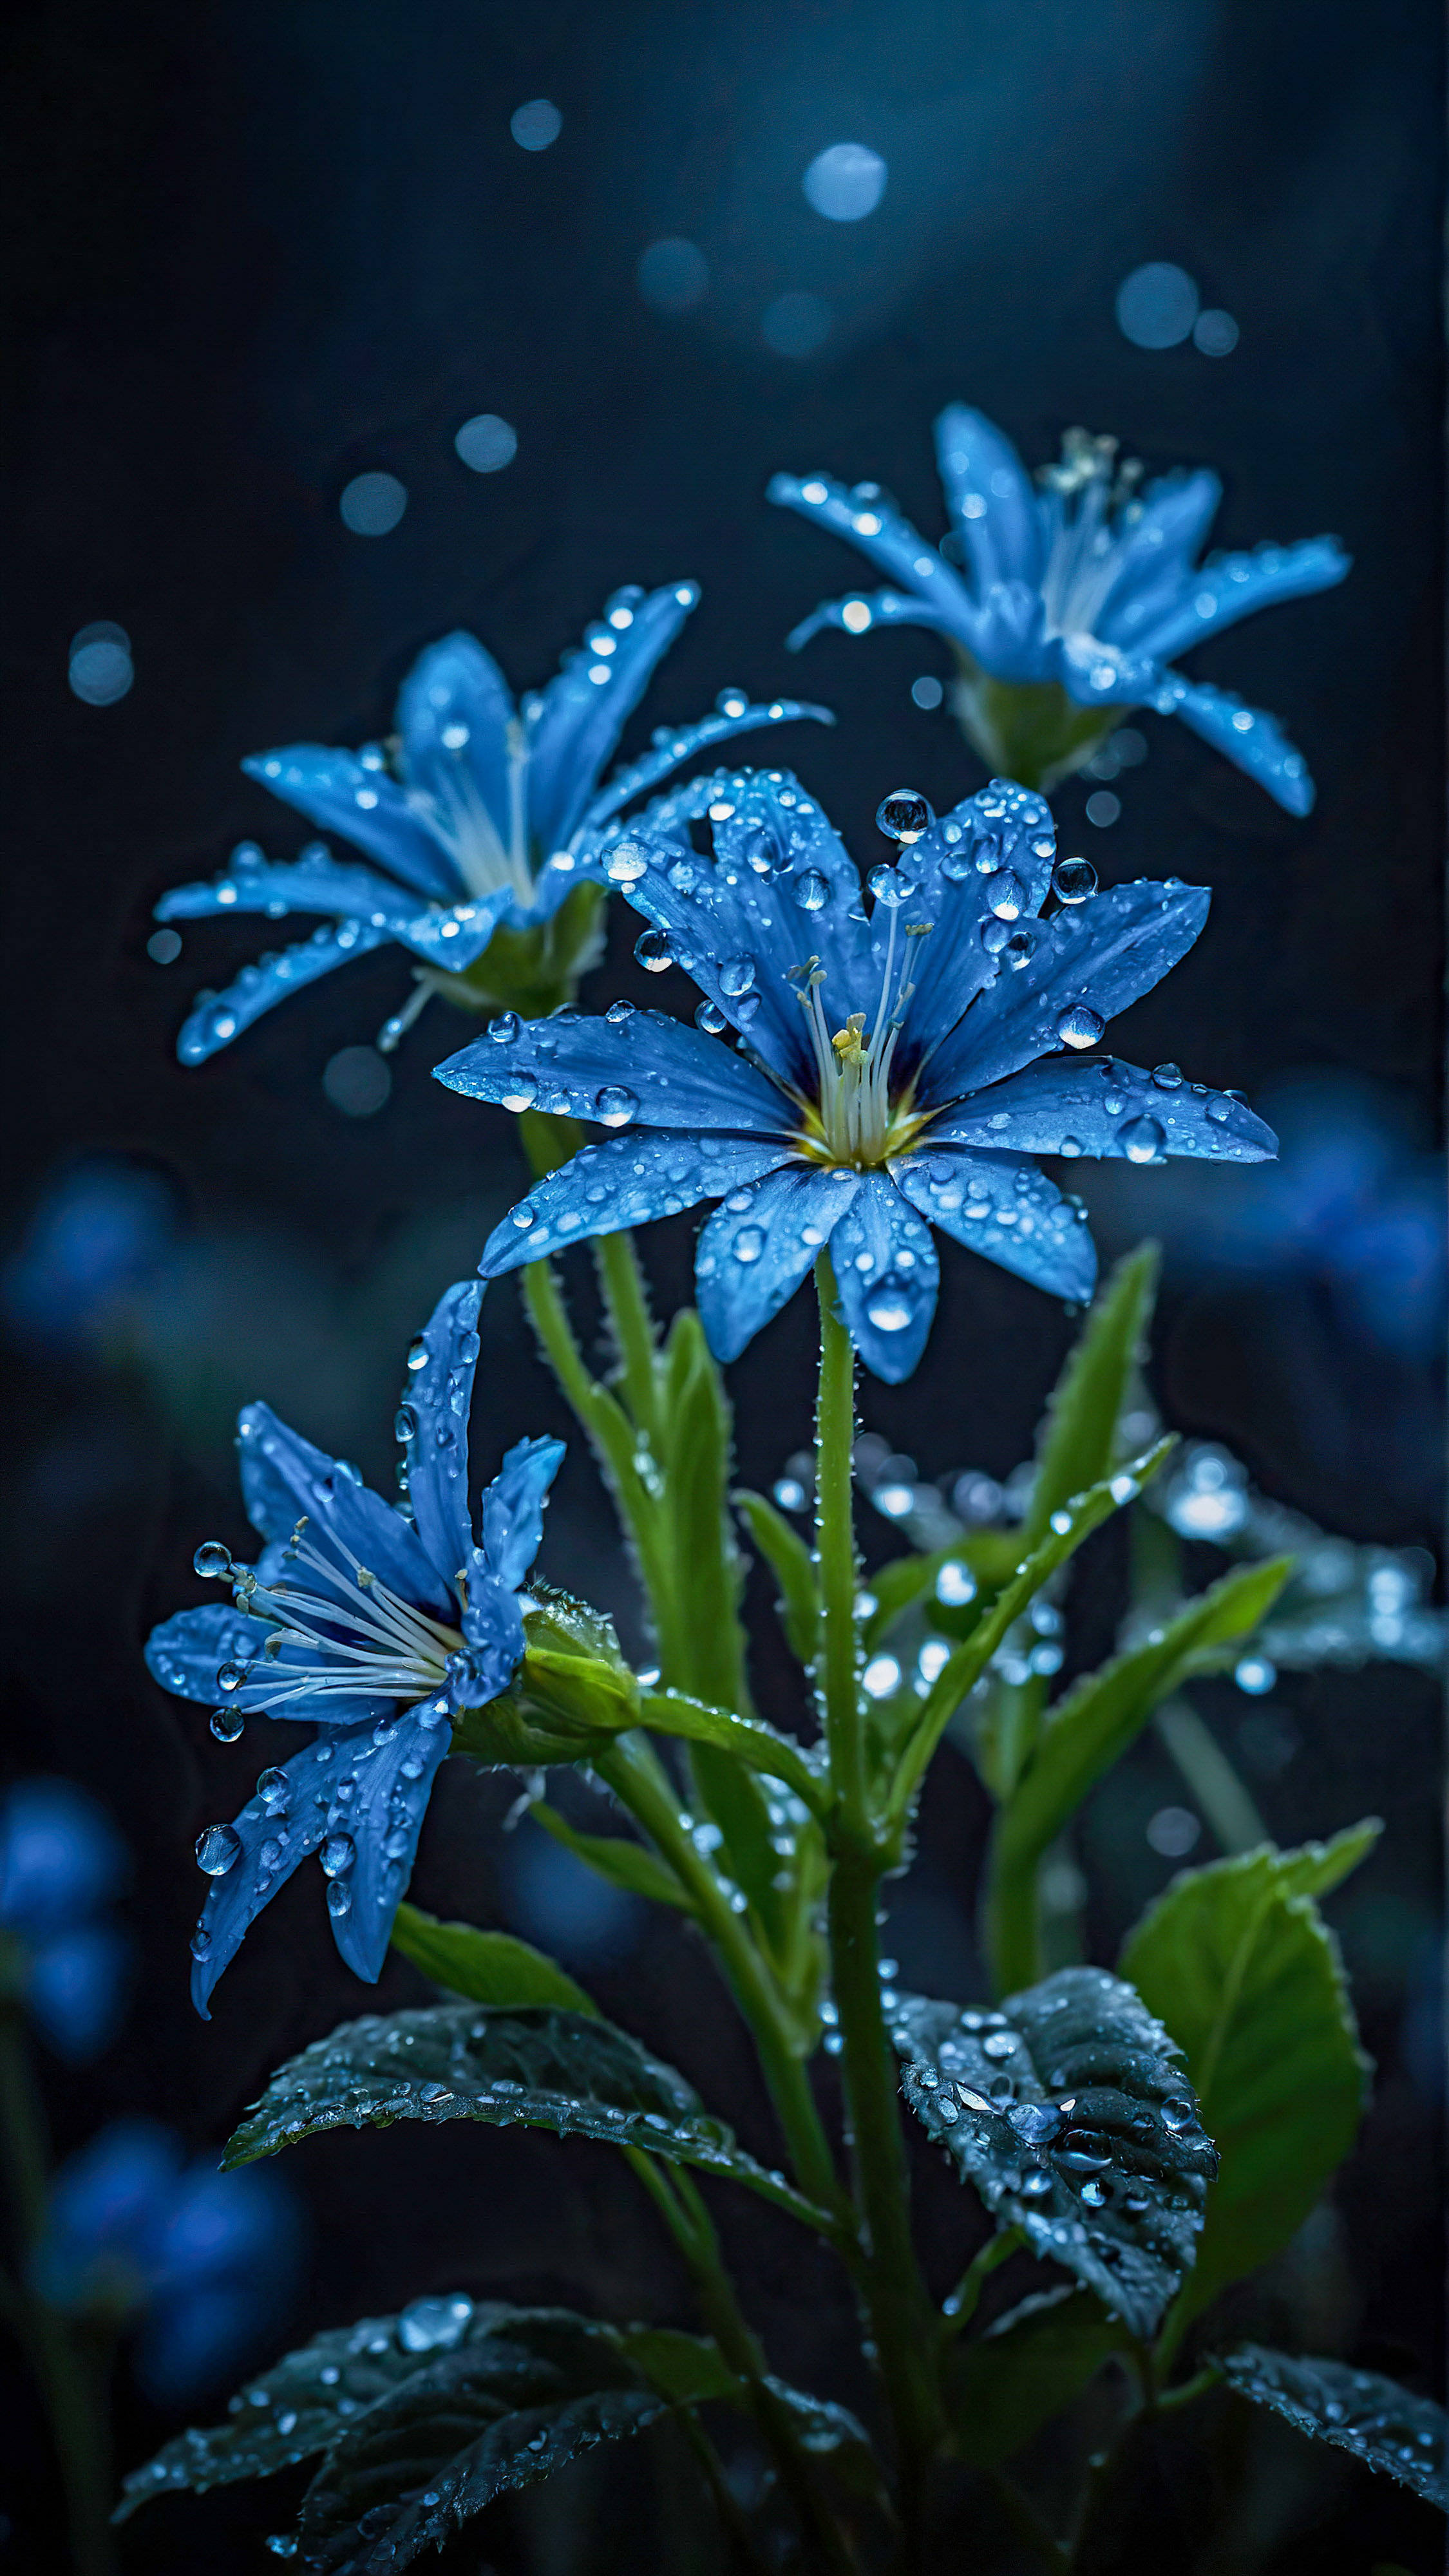 Experience the tranquility of nature with our beautiful iPhone wallpaper, a serene and mystical scene of glowing blue flowers with dew drops, set against a dark, blurred background.